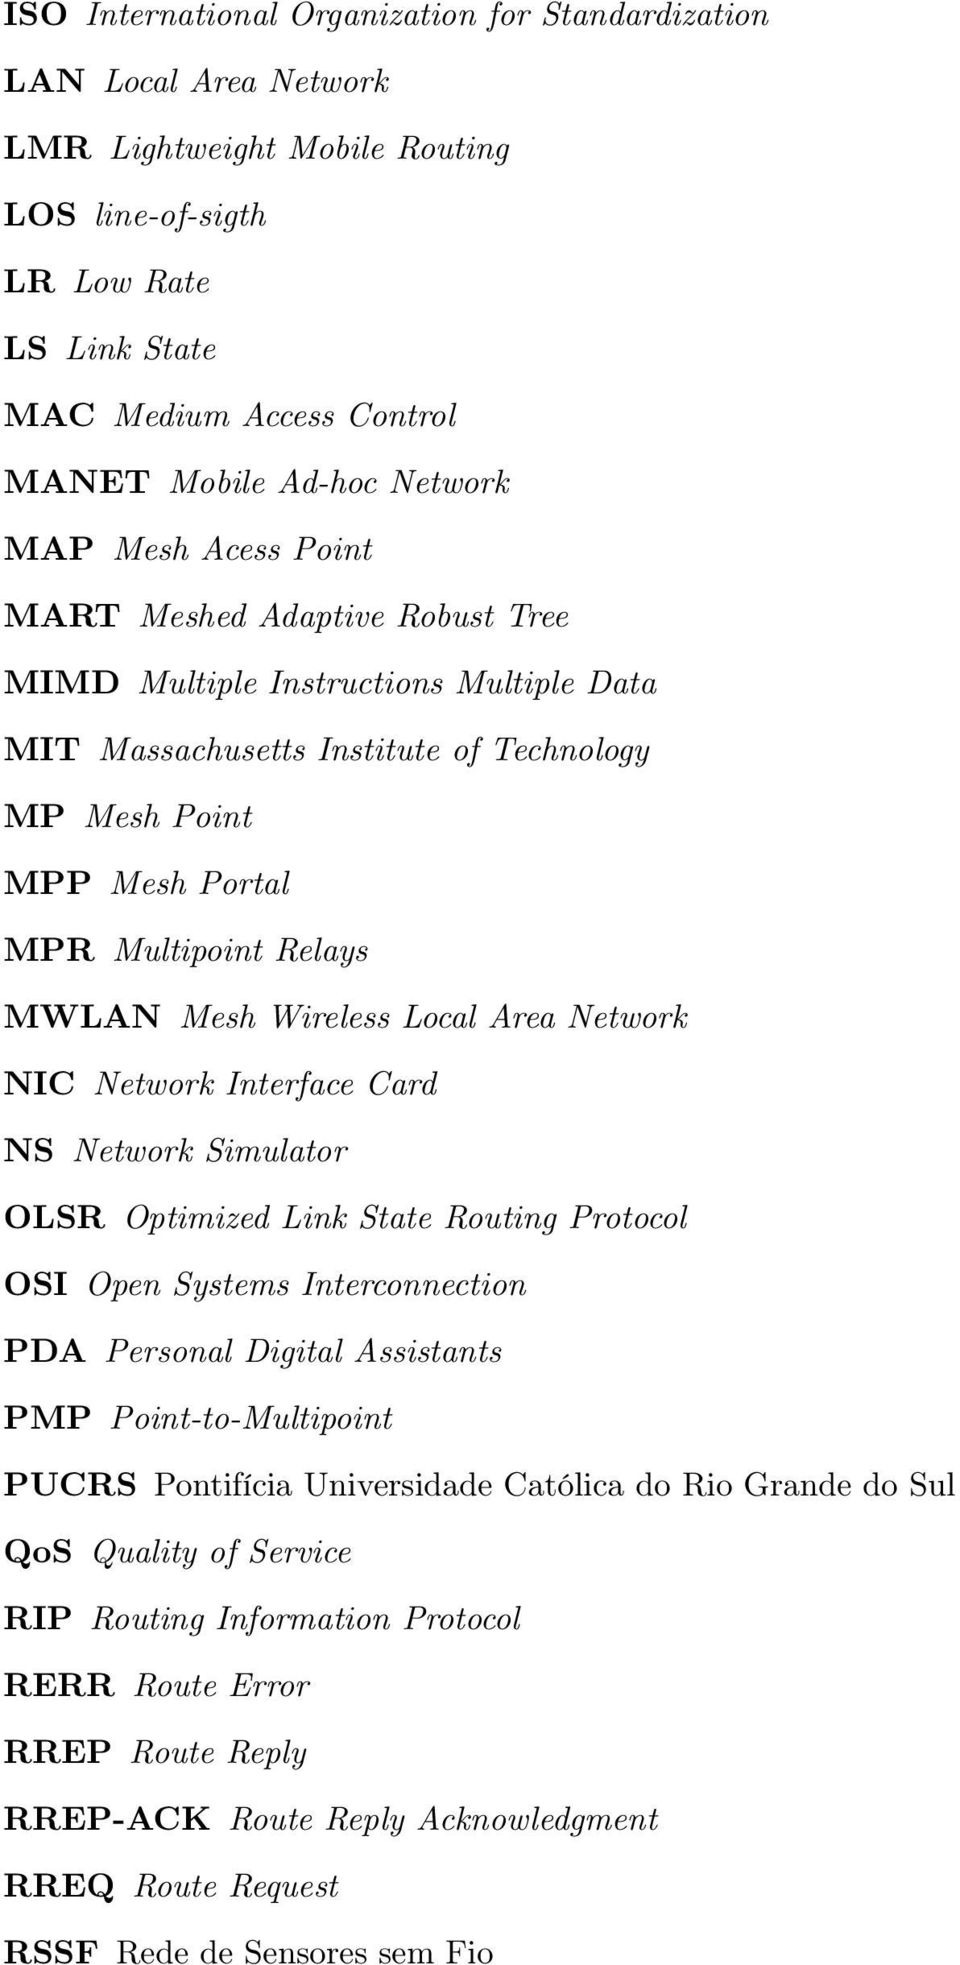 MWLAN Mesh Wireless Local Area Network NIC Network Interface Card NS Network Simulator OLSR Optimized Link State Routing Protocol OSI Open Systems Interconnection PDA Personal Digital Assistants PMP